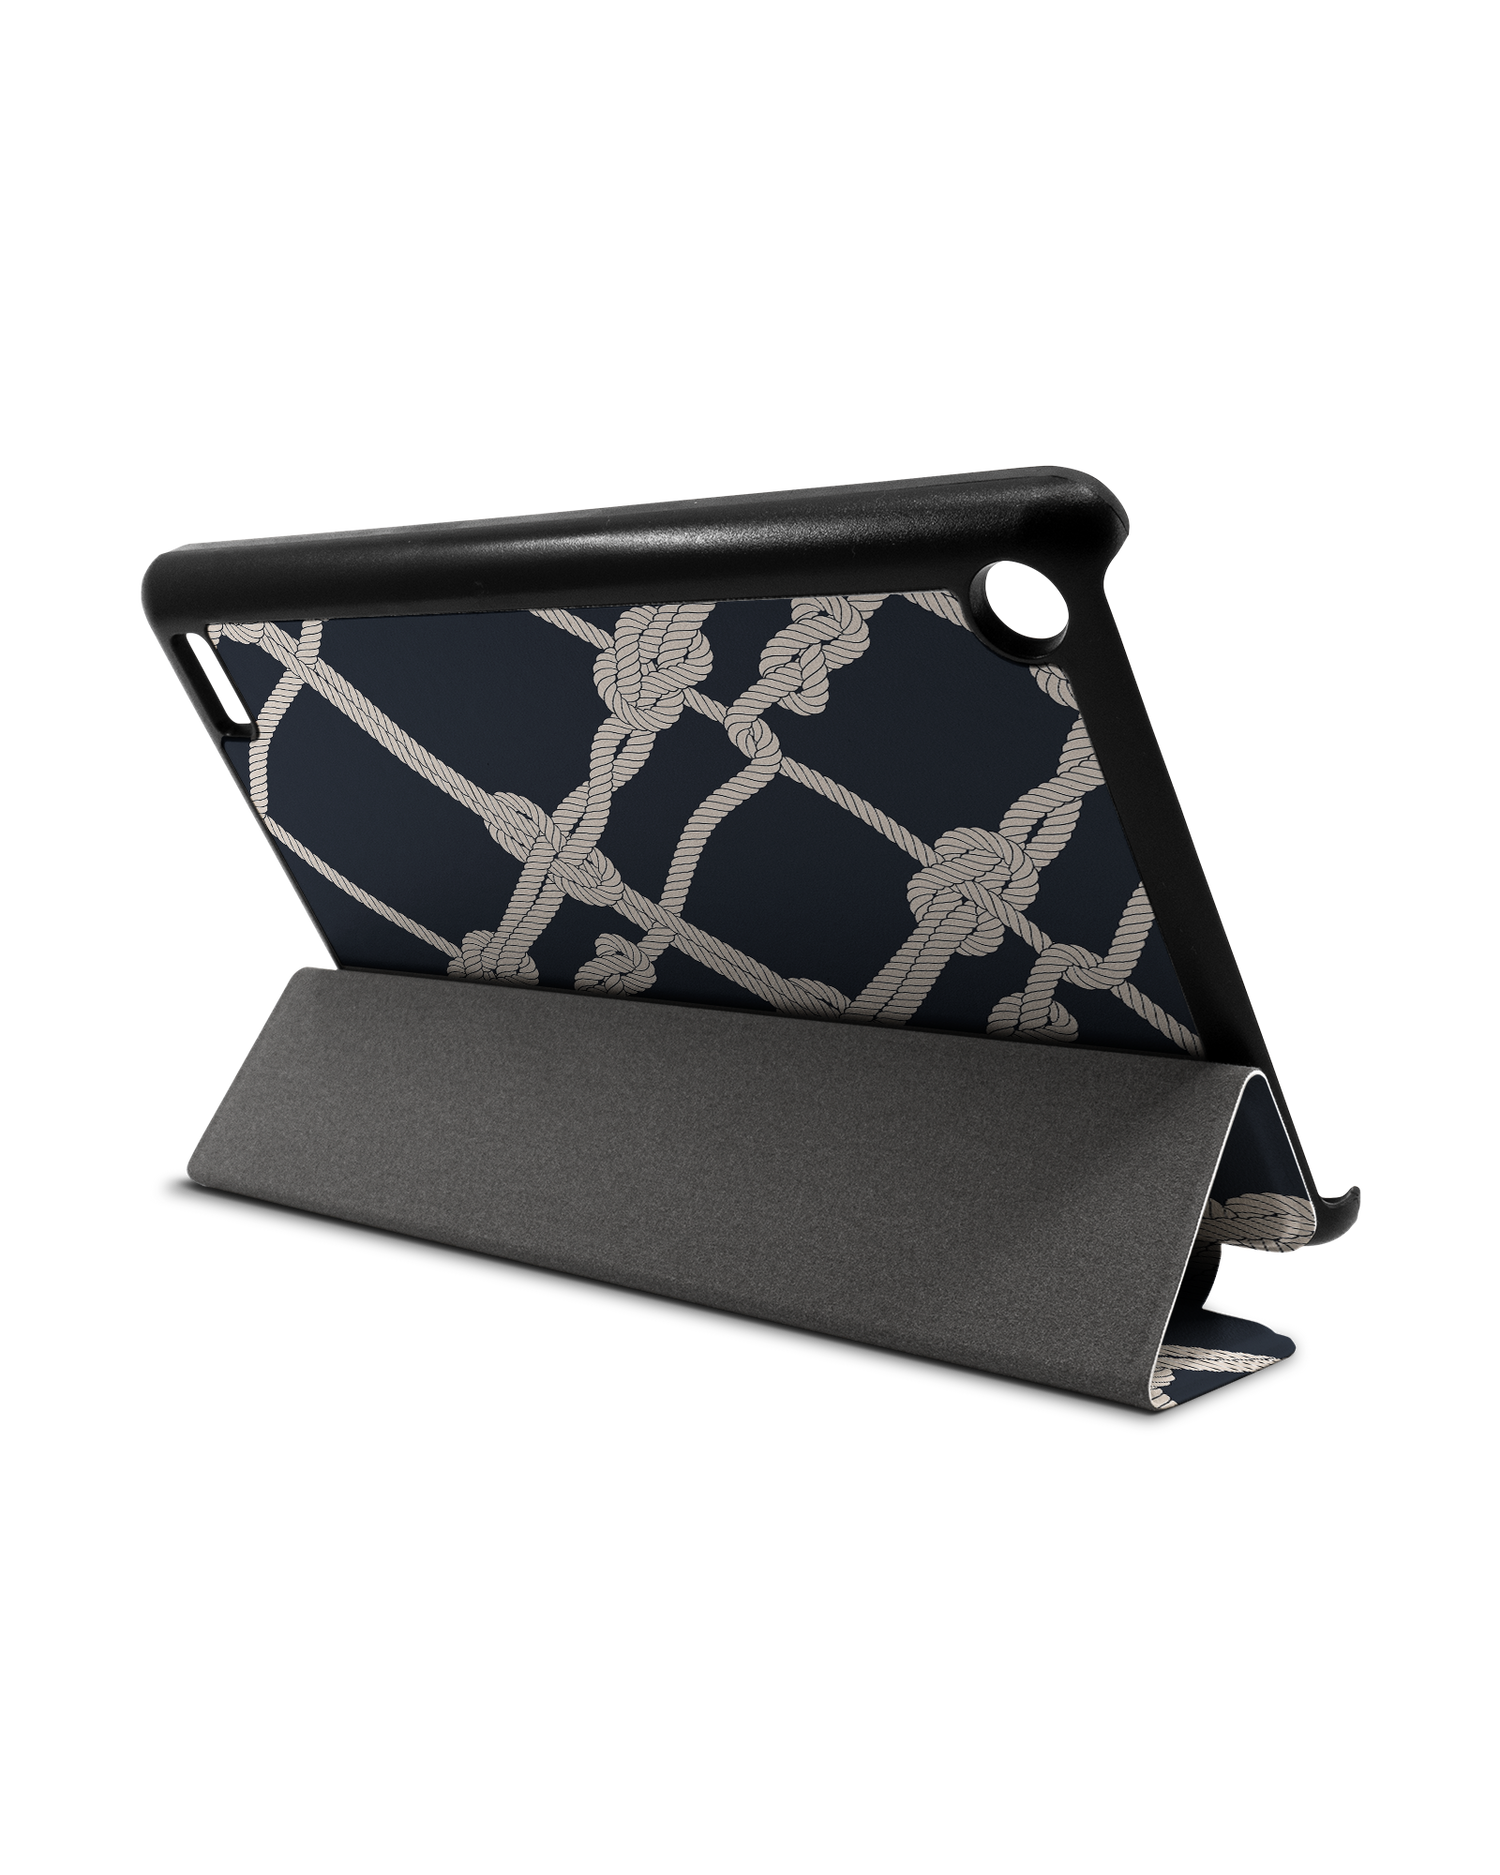 Nautical Knots Tablet Smart Case for Amazon Fire 7: Used as Stand